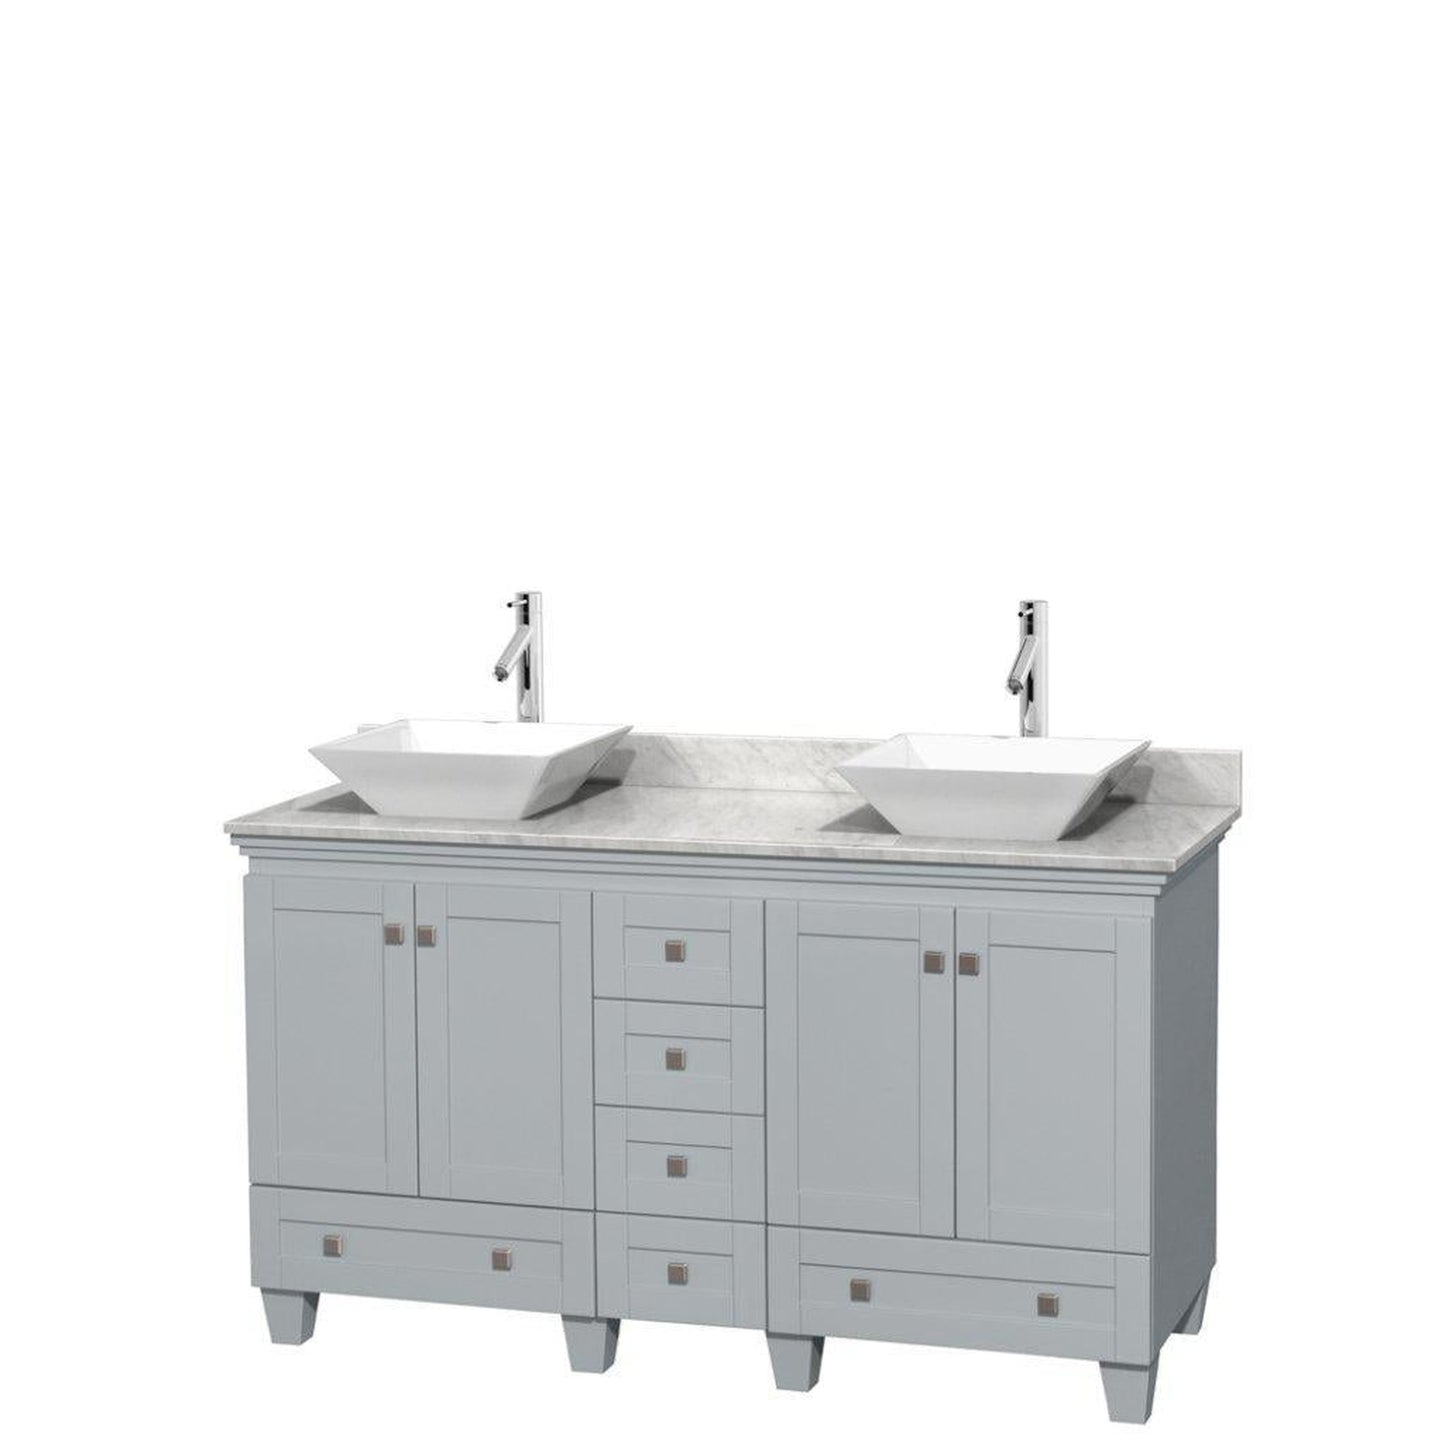 Wyndham Collection Acclaim 60" Double Bathroom Oyster Gray Vanity With White Carrara Marble Countertop And Pyra White Porcelain Sinks